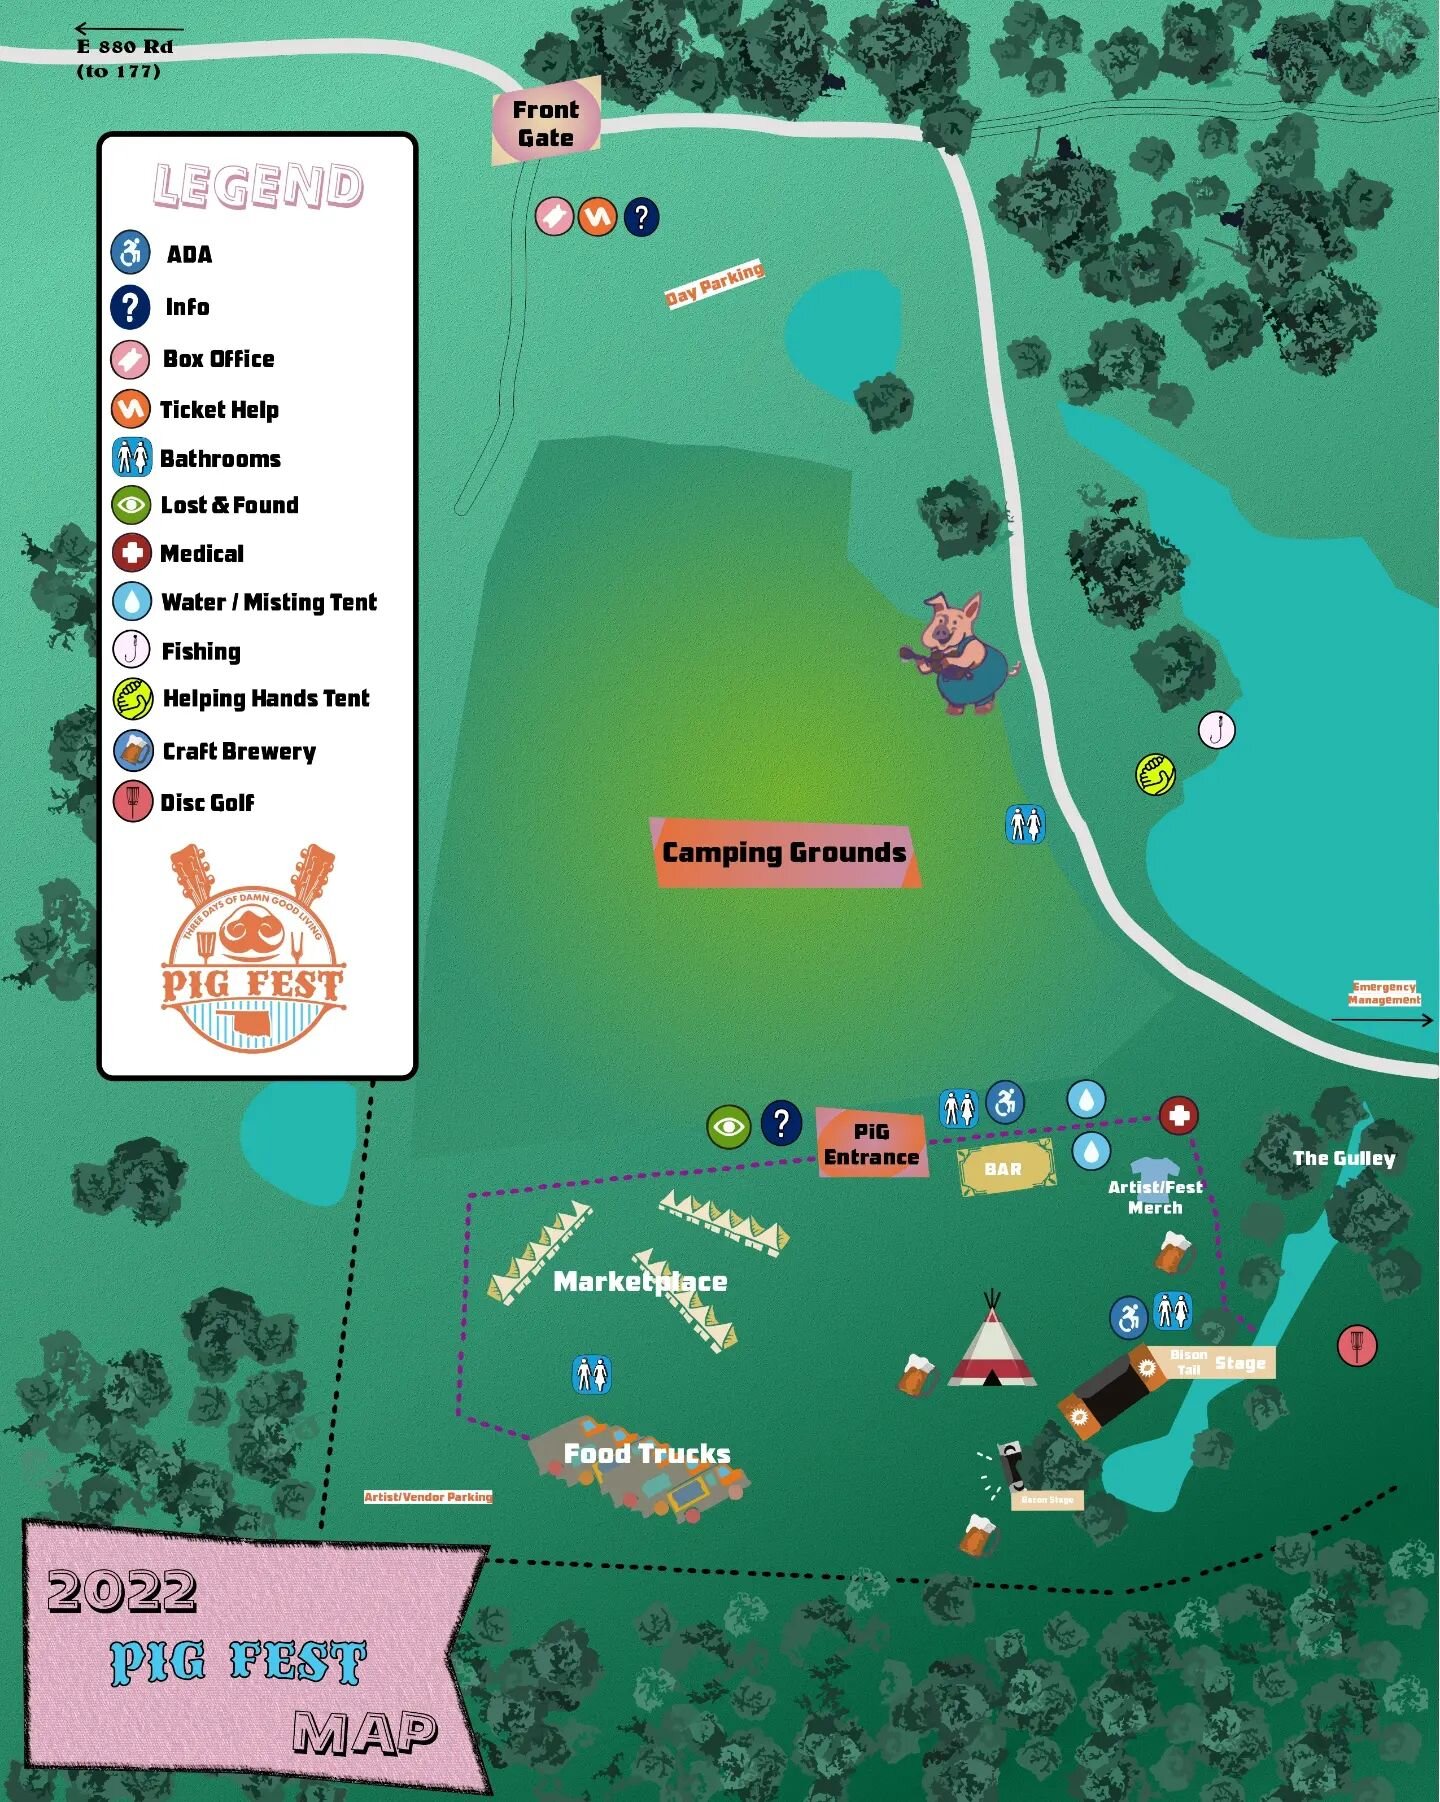 🚨 Your PiG Fest: Music and Some Arts Festival map is here along with the updated schedule to include Kenny Pitts Music and Cloud Painter 🚨

Check it out! Make plans! And we'll see you there 😎

www.pigfestok.com and tap &quot;Buy Tickets&quot; righ